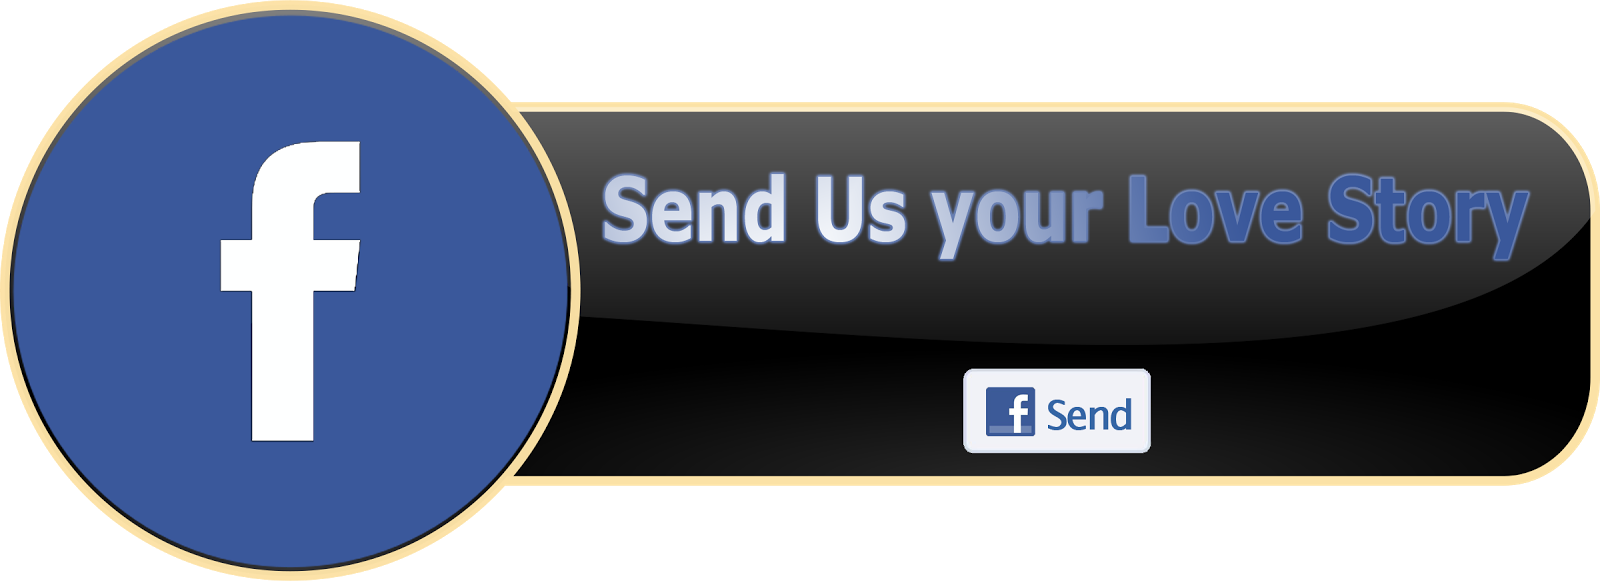  Send Us Now you Love Story By Facebook